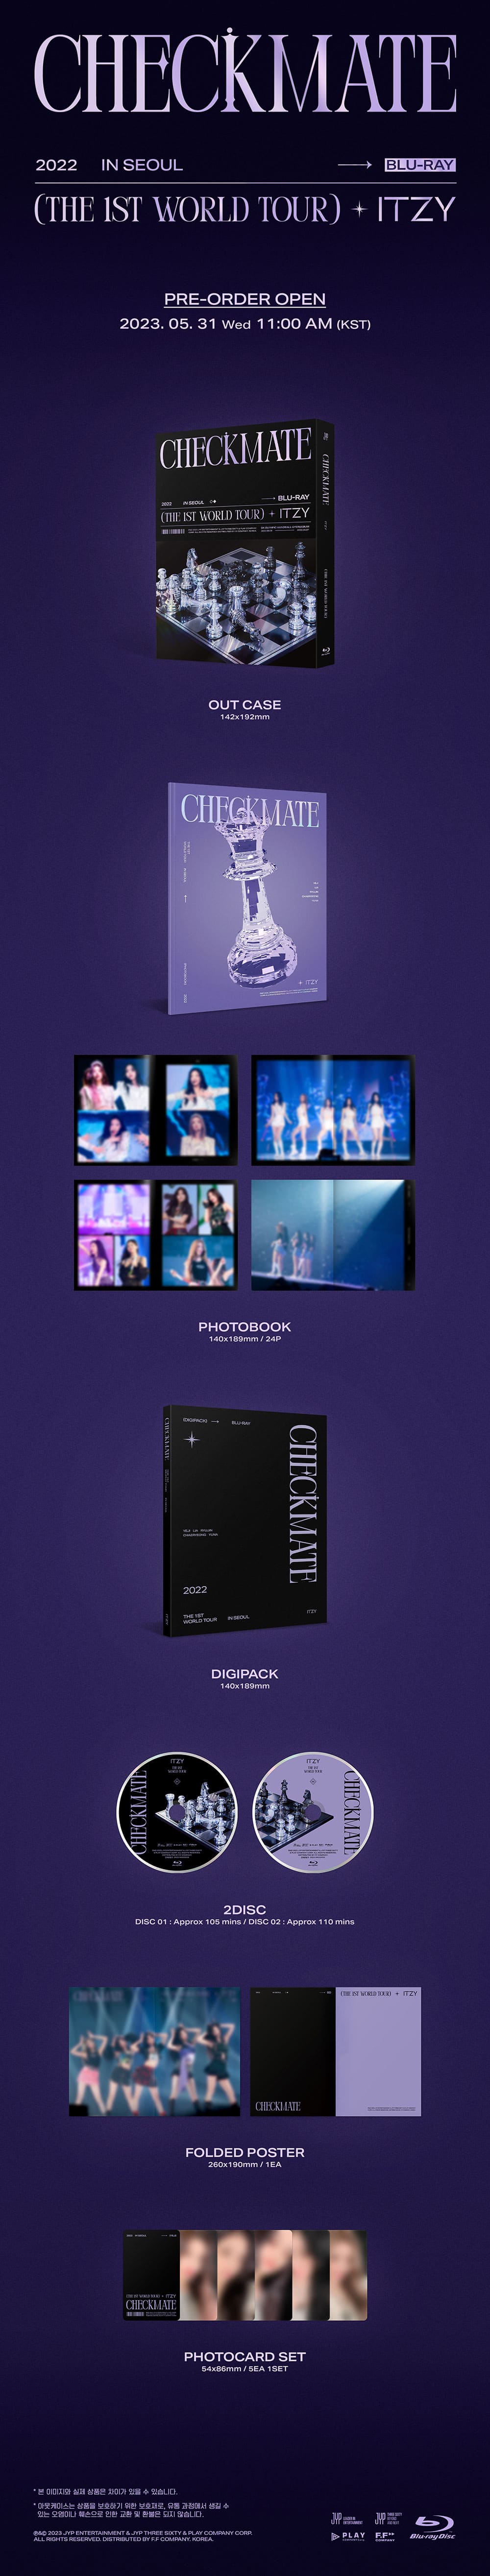 ITZY - 2022 ITZY THE 1ST WORLD TOUR [CHECKMATE] in SEOUL Blu-ray